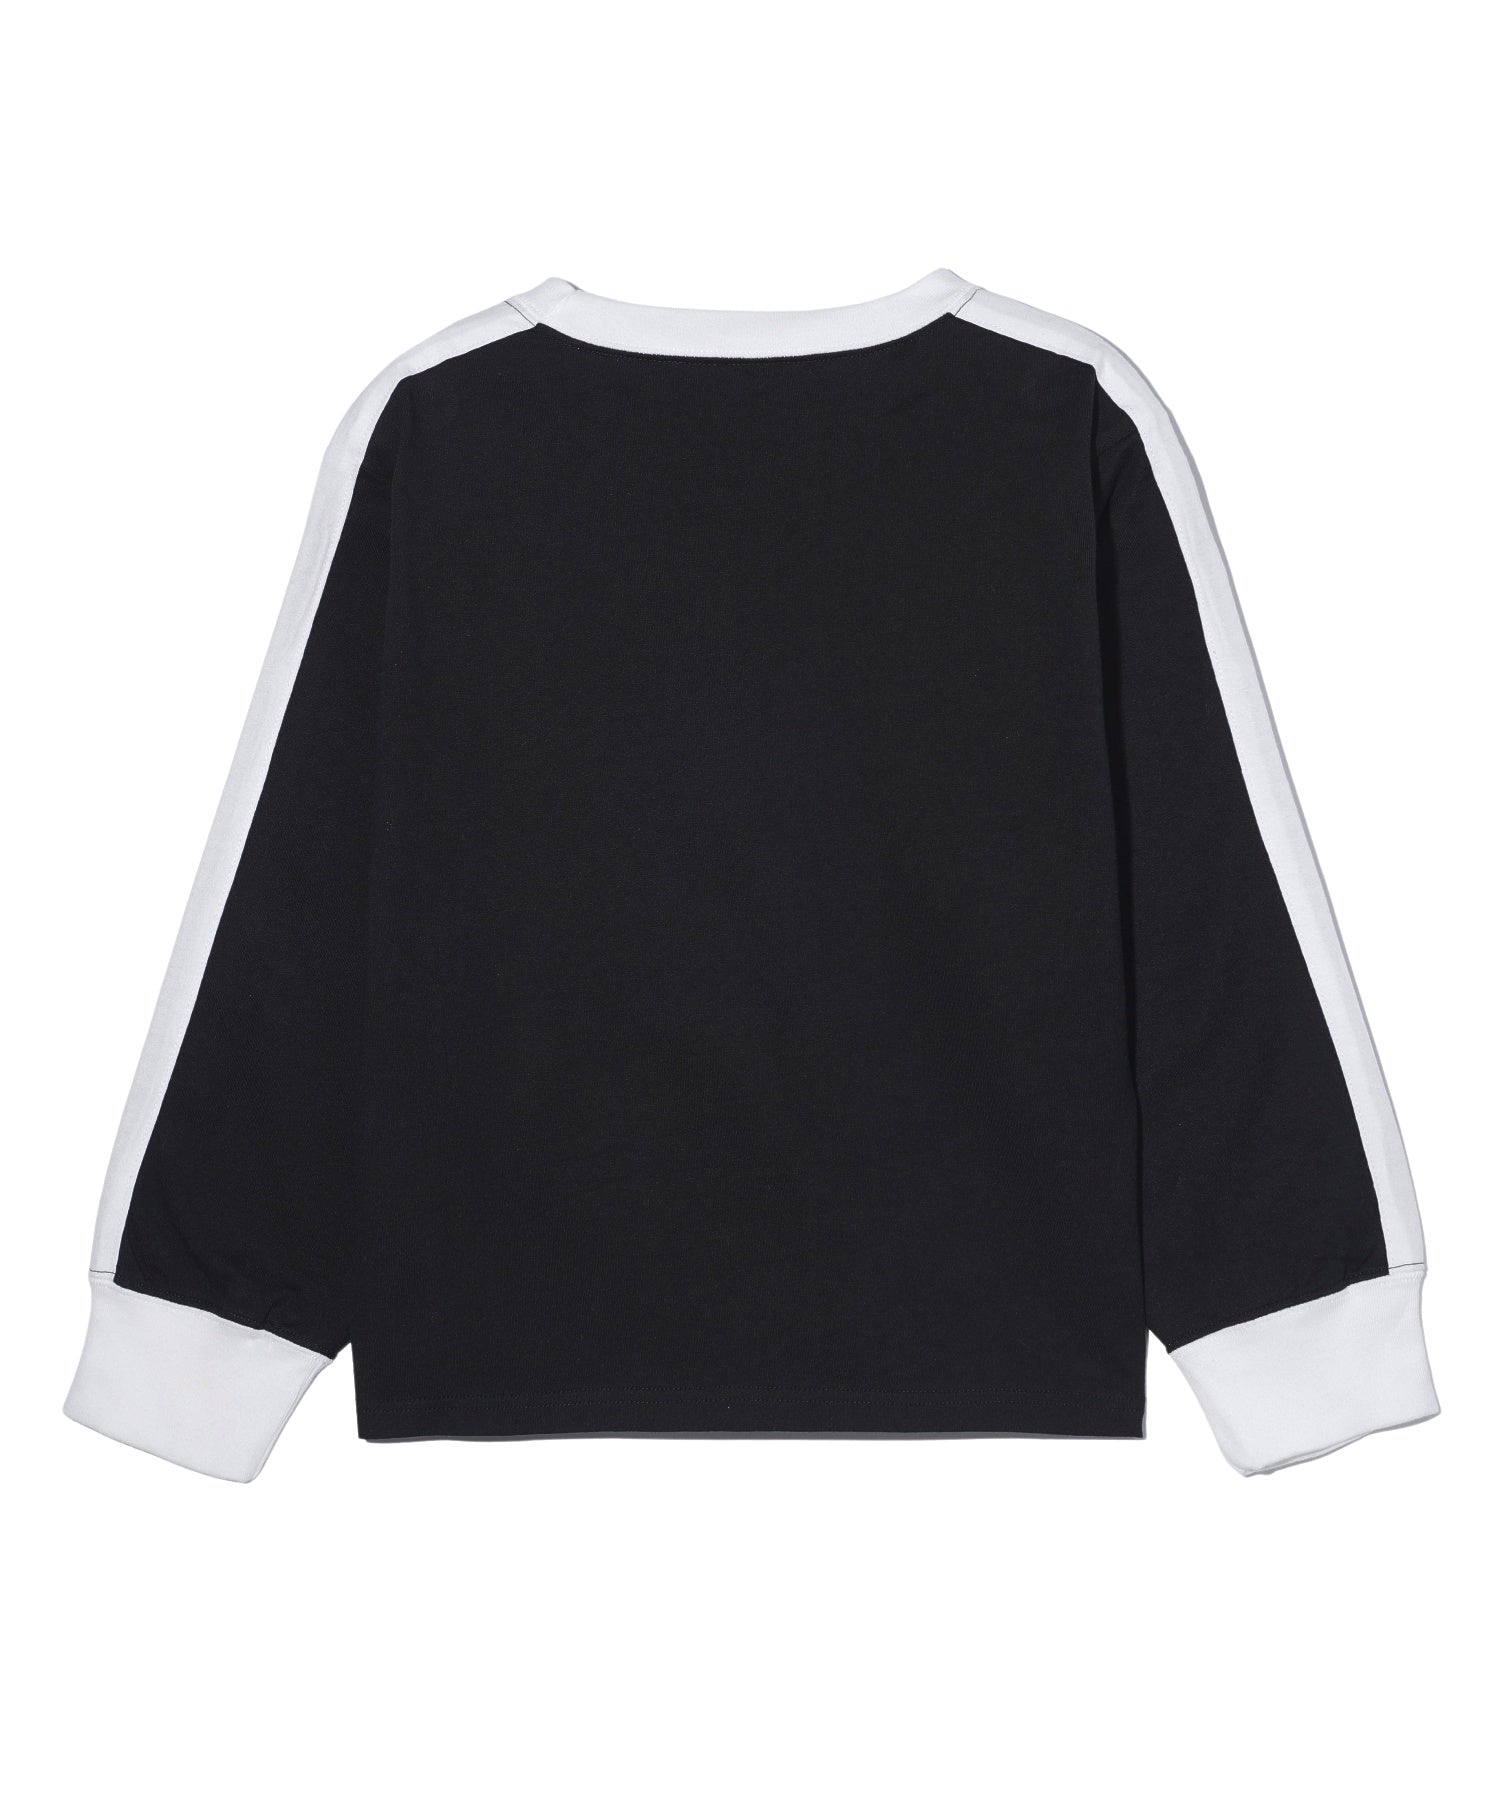 STRIPED SLEEVE COMPACT L/S TOP